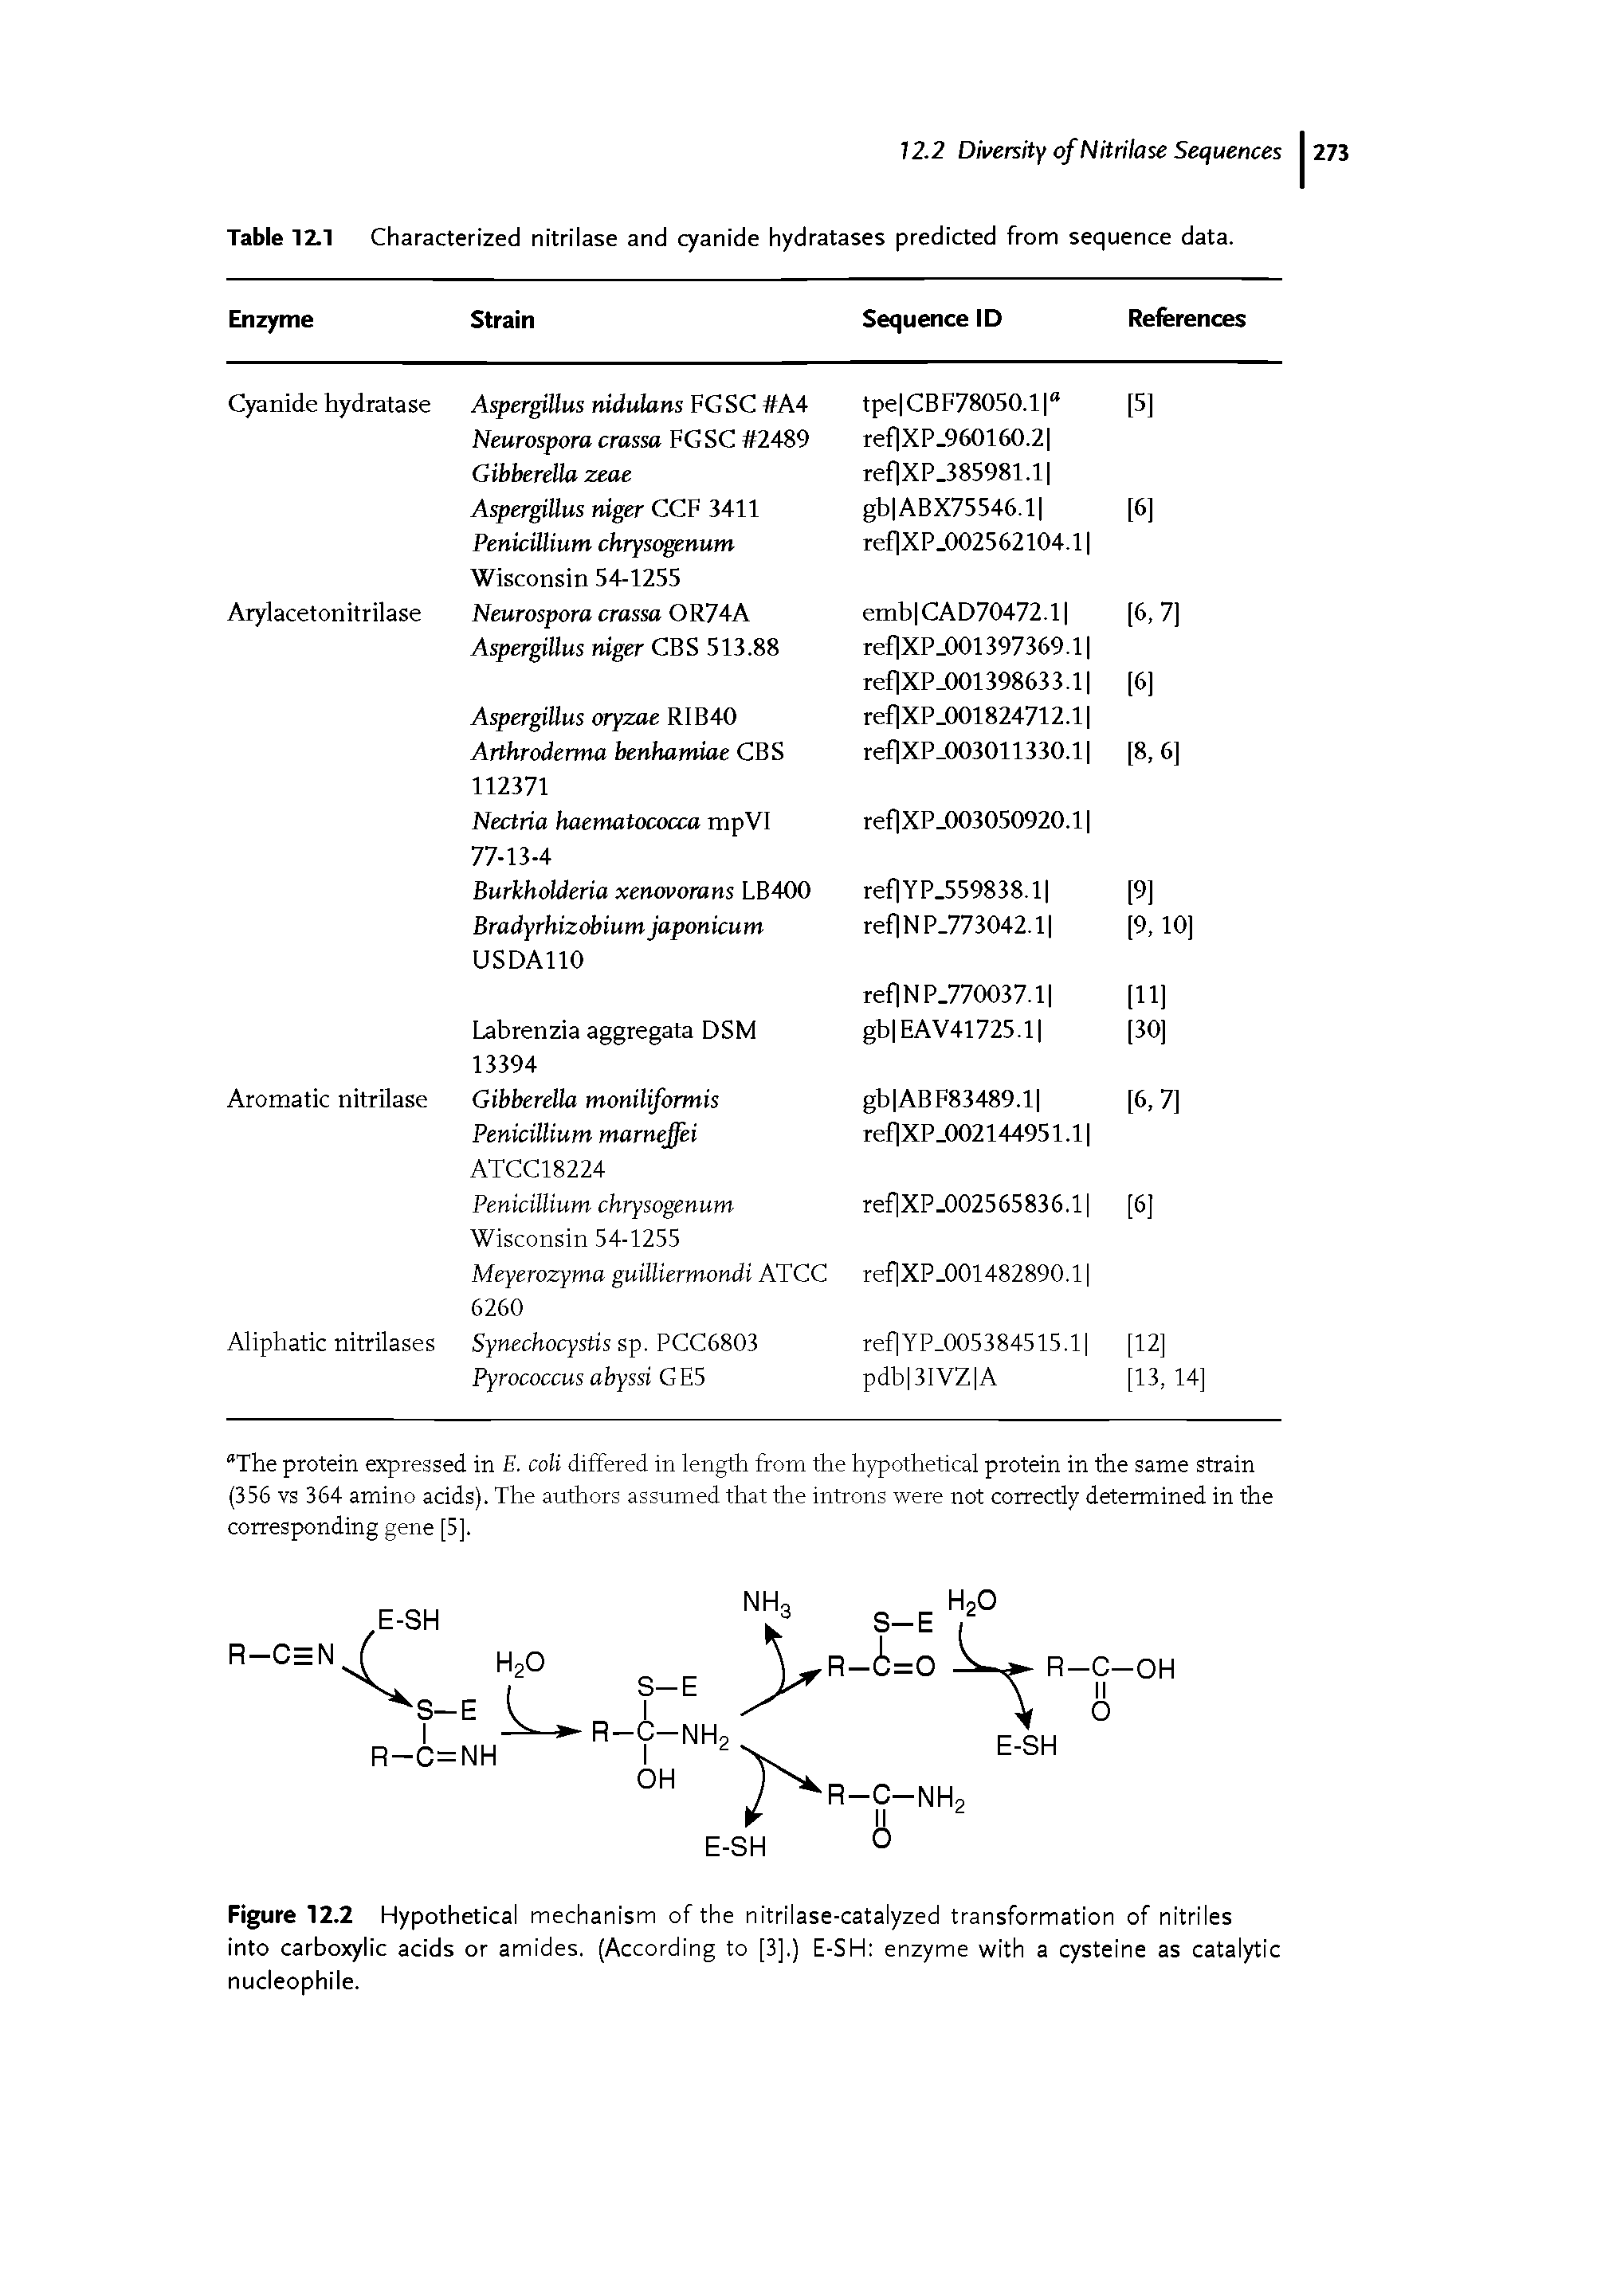 Figure 12.2 Hypothetical mechanism of the nitrilase-catalyzed transformation of nitriles into carboxylic acids or amides. (According to [3].) E-SH enzyme with a cysteine as catalytic nucleophile.